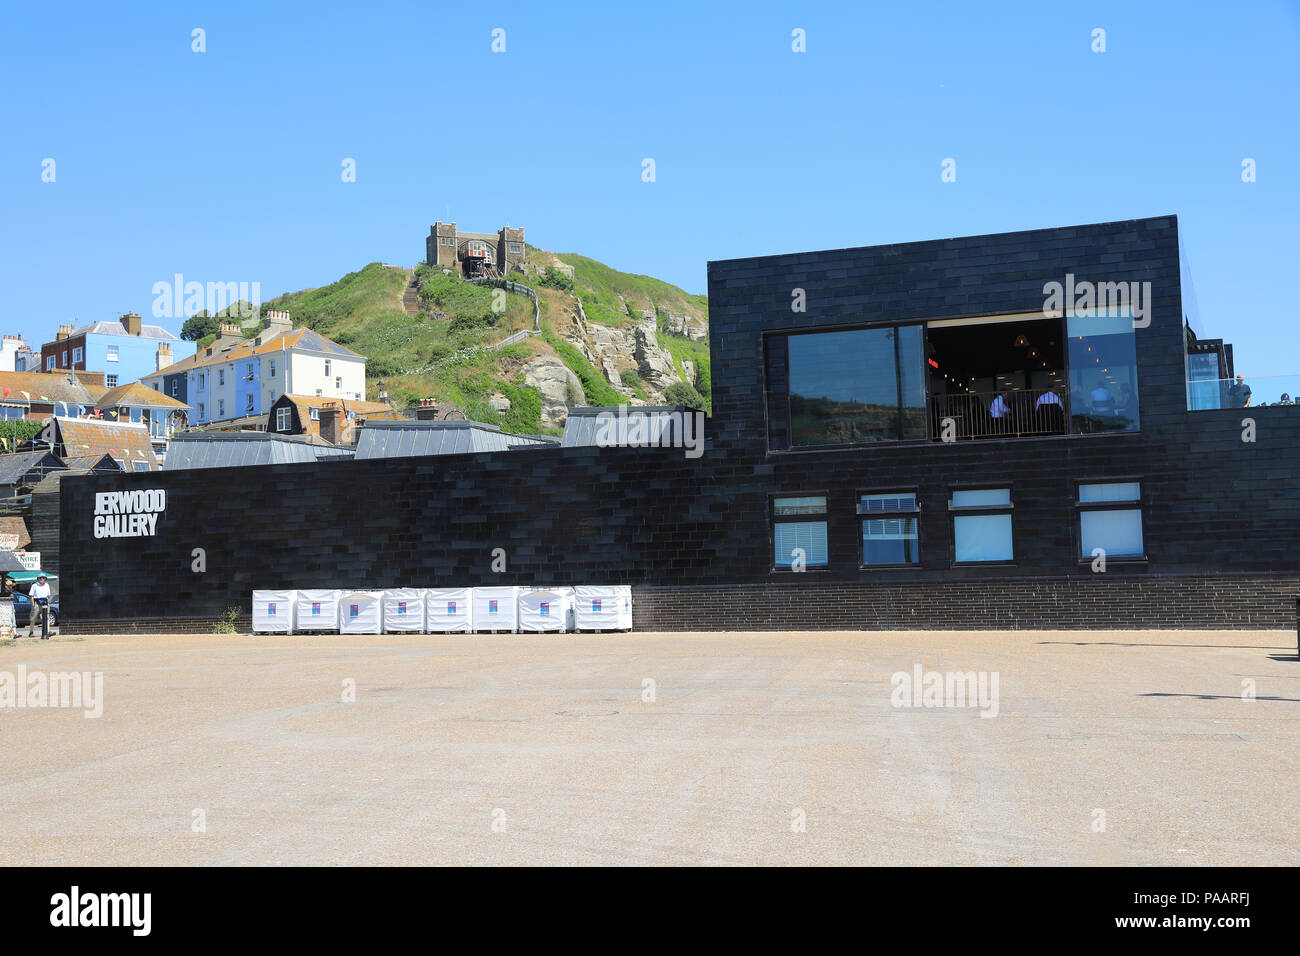 The award winning Jerwood Gallery, a museum of contemporary British art, located on The Stade, in Hastings, East Sussex, UK Stock Photo